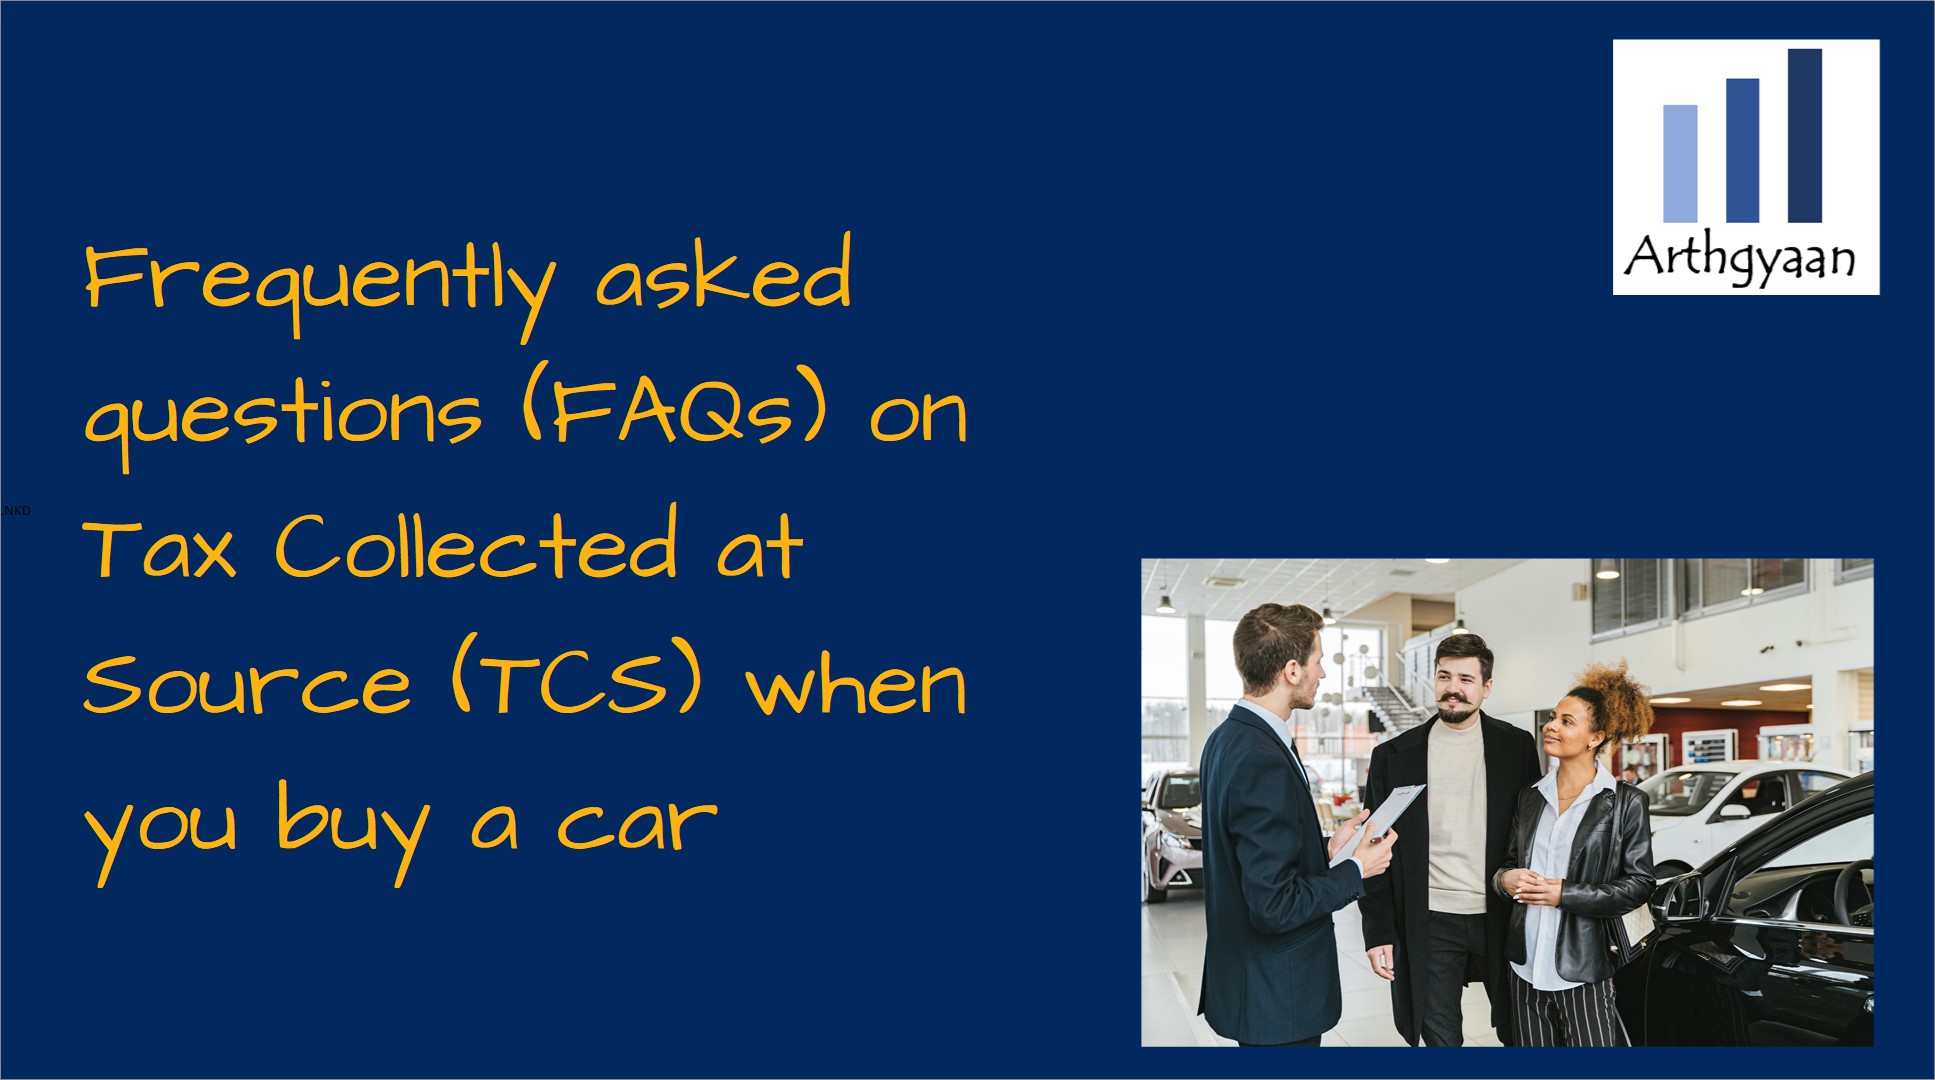 Frequently asked questions (FAQs) on Tax Collected at Source (TCS) when you buy a car